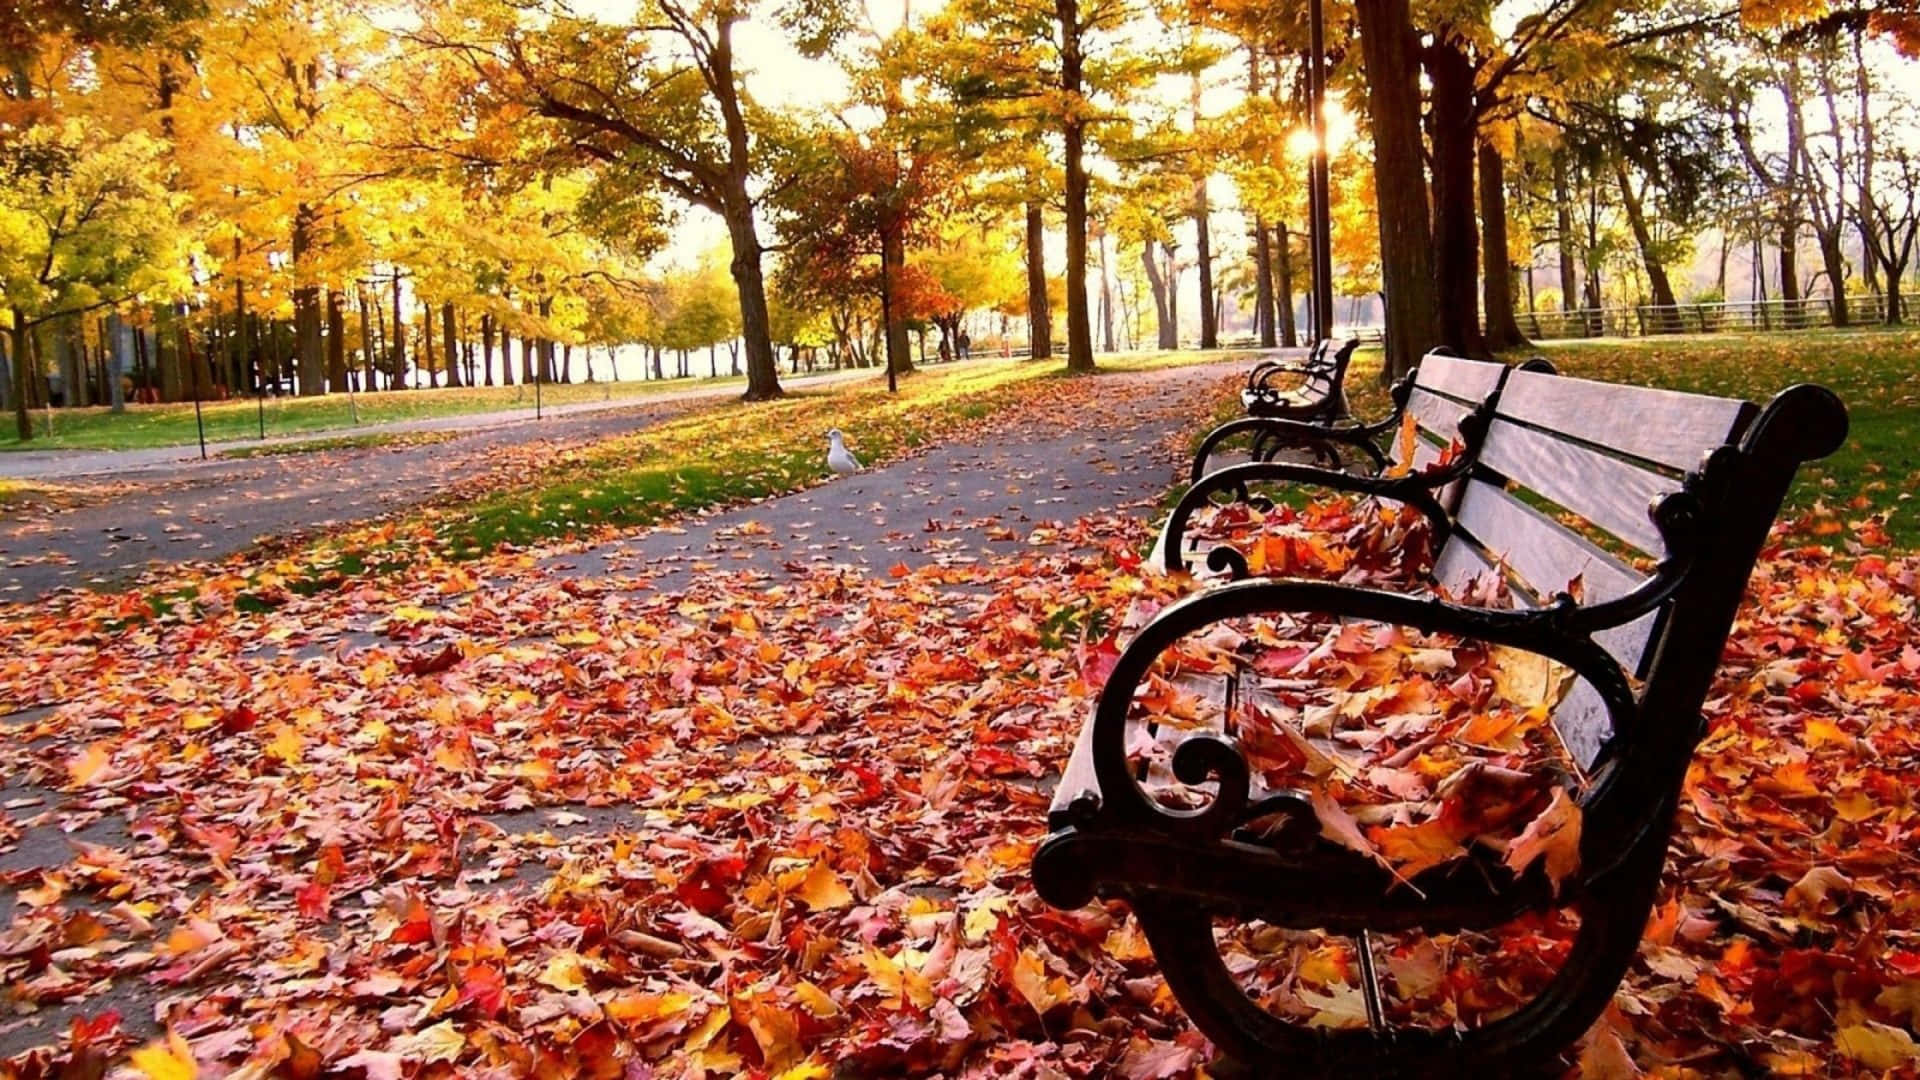 Fall Tumblr Park Bench With Dried Leaves Wallpaper